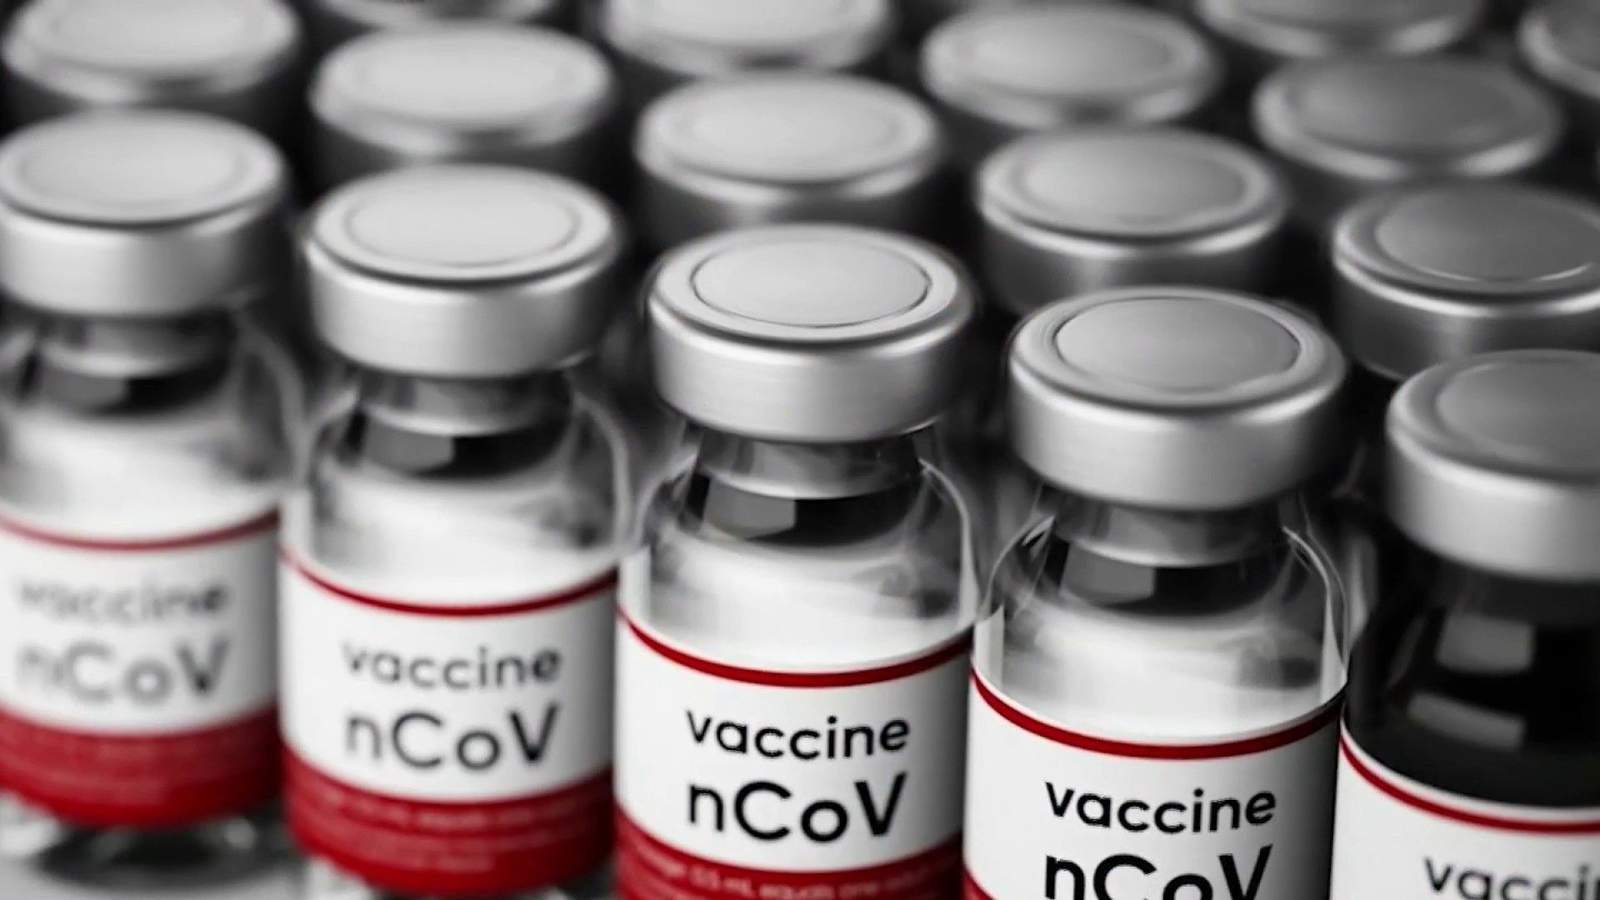 Your questions answered: COVID-19 vaccine rollout in Texas